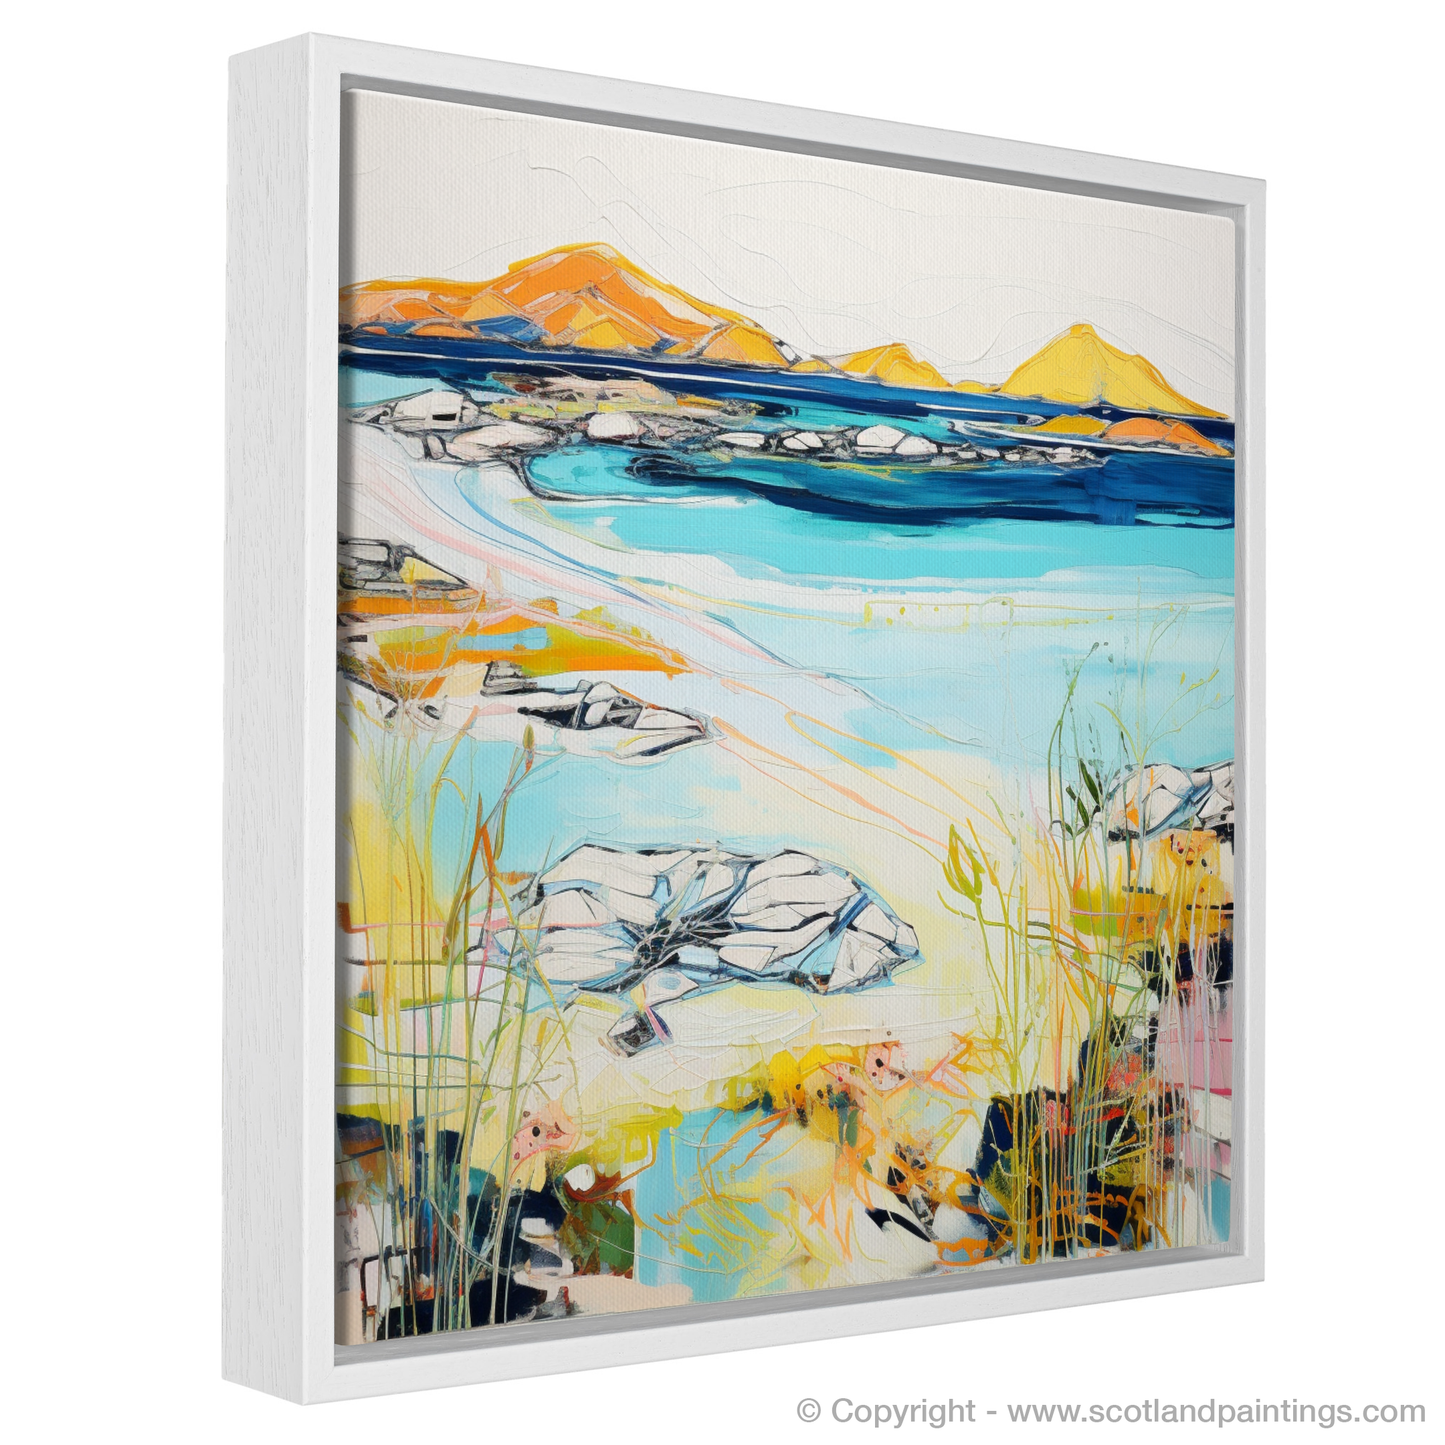 Painting and Art Print of Isle of Barra entitled "Isle of Barra: A Symphony of Colours".